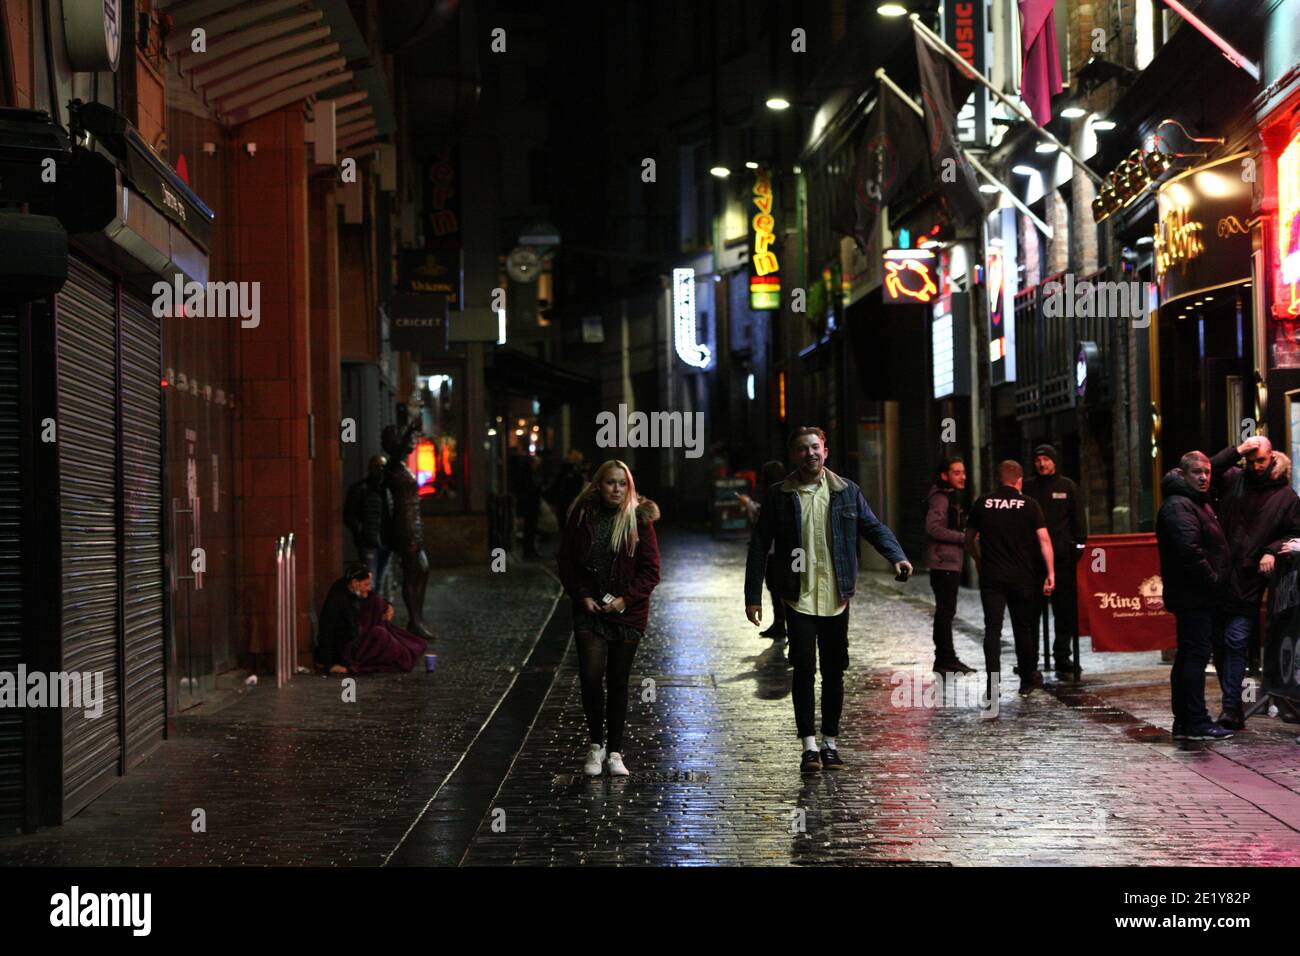 Liverpool, UK - October 10 2020: Mathew Street in Liverpool on the last weekend before stricter lockdown measures are expected across the north. Stock Photo